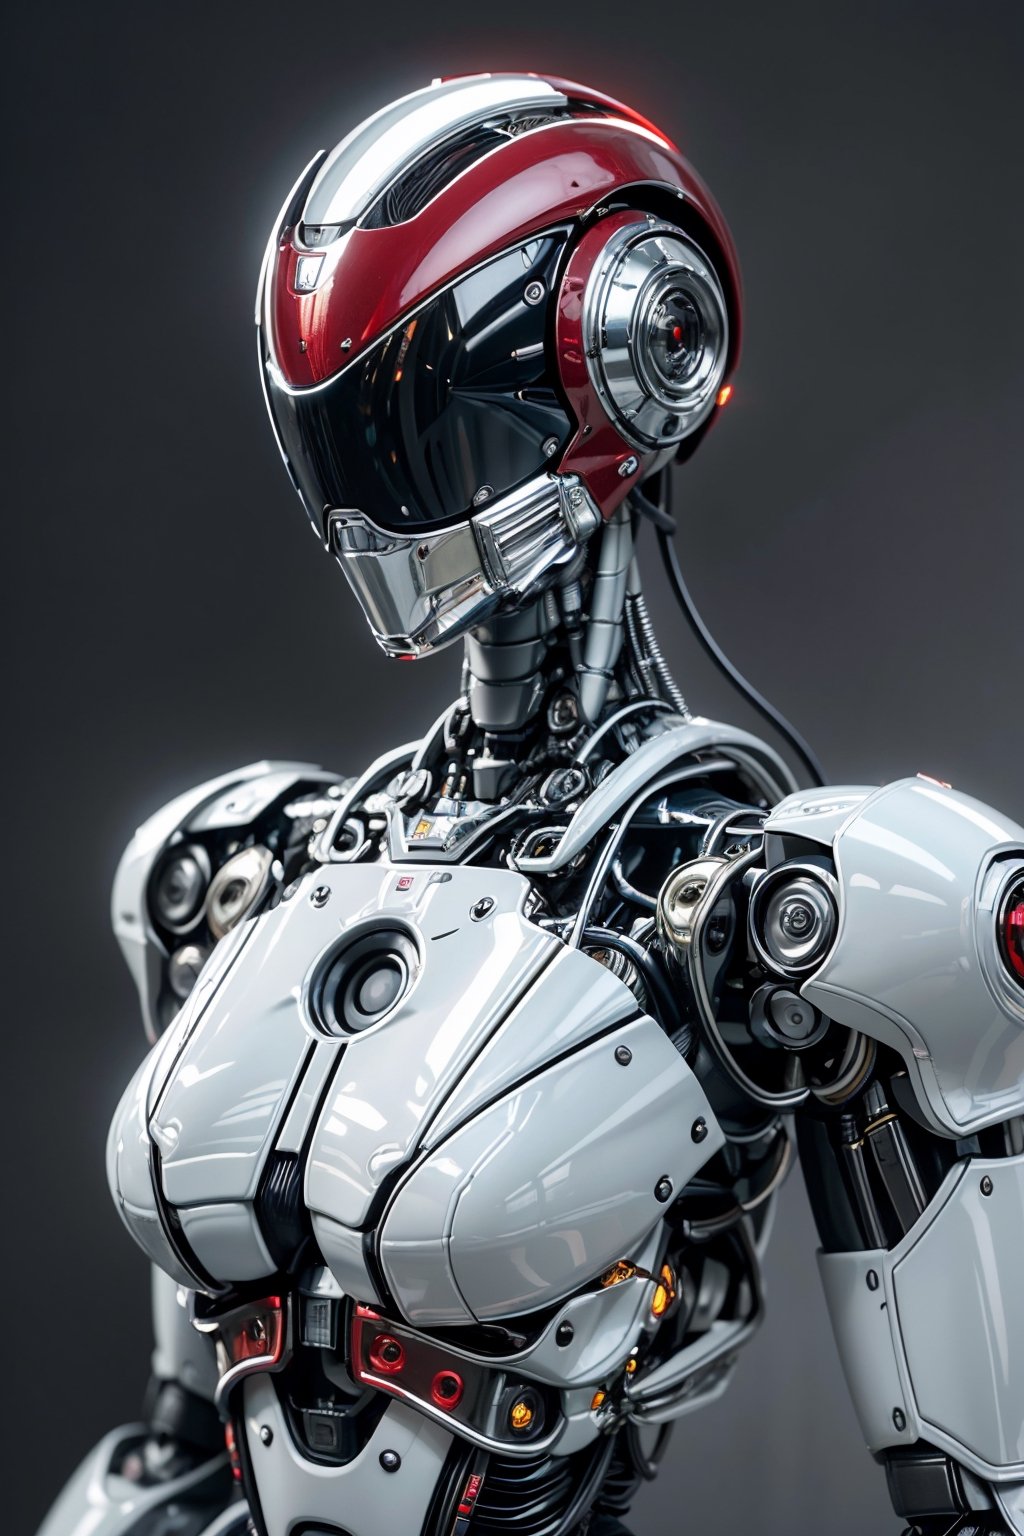 ((high resolution)), ((8K)), ((incredibly absurdres)), break. (super detailed metallic skin), (extremely delicate and beautiful:1.3) ,break, ((one female robot:1.5)), ((slender body)), (medium breasts), (beautiful hand), ((red metalic body:1.5)) , ((cyber helmet with full-face mask:1.4)) ,break. ((no hair:1.3)) ,break. ((intricate internal structure)), ((brighten parts:1.5)), break. ((robotic face:1.2)), (robotic arms), (robotic legs), (robotic hands), ((robotic joint:1.2)), (Cinematic angle), (ultra fine quality), (masterpiece), (best quality), (incredibly absurdres), (fhighly detailed), highres, high detail eyes, high detail background, sharp focus, (photon mapping, radiosity, physically-based rendering, automatic white balance), masterpiece, best quality, ((Mecha body)), furure_urban, incredibly absurdres,science fiction